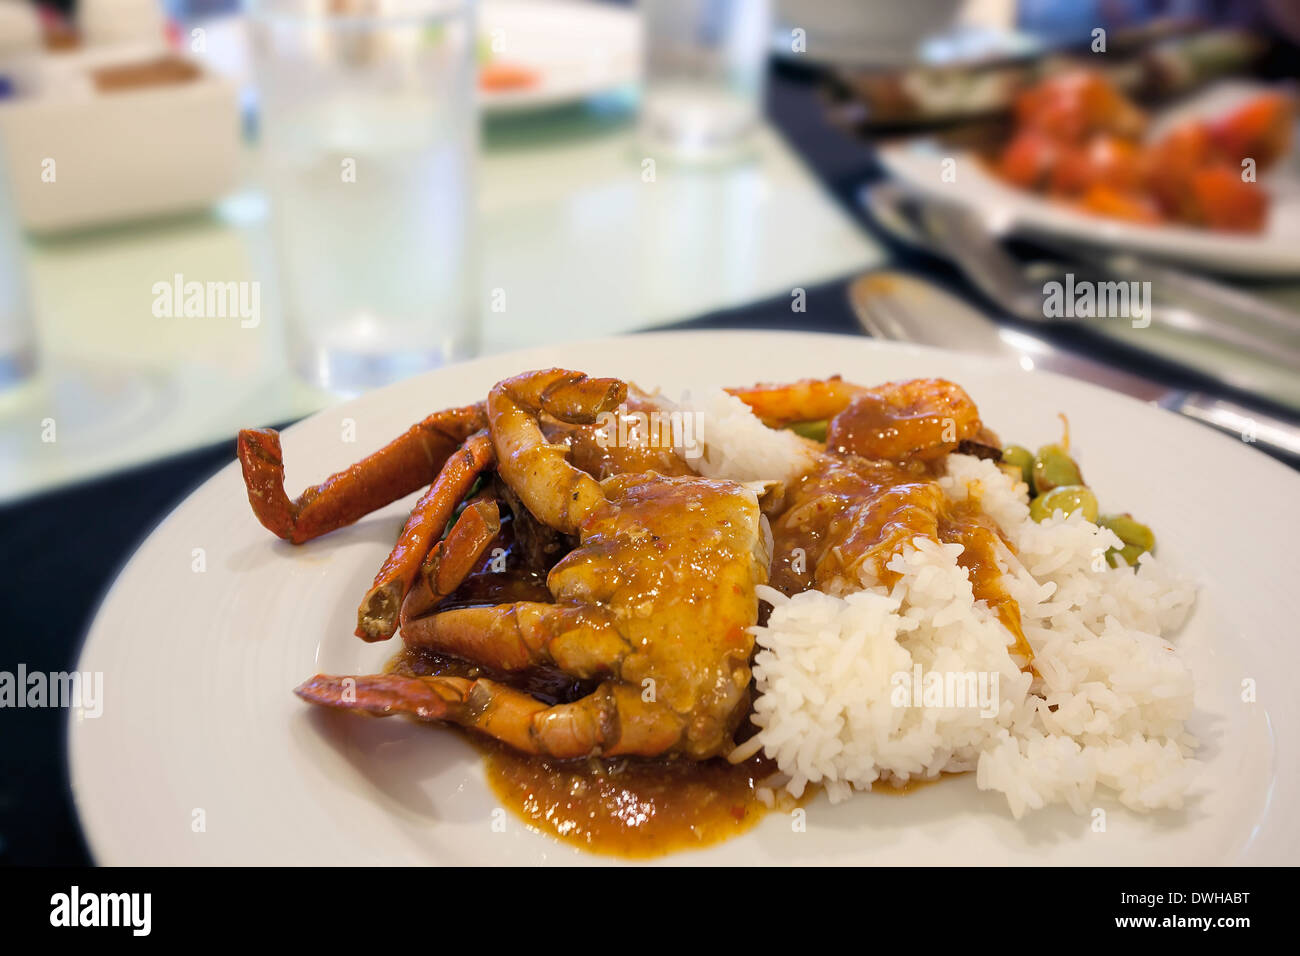 Singapore Spicy Chili Crab with Steam Rice Closeup Stock Photo